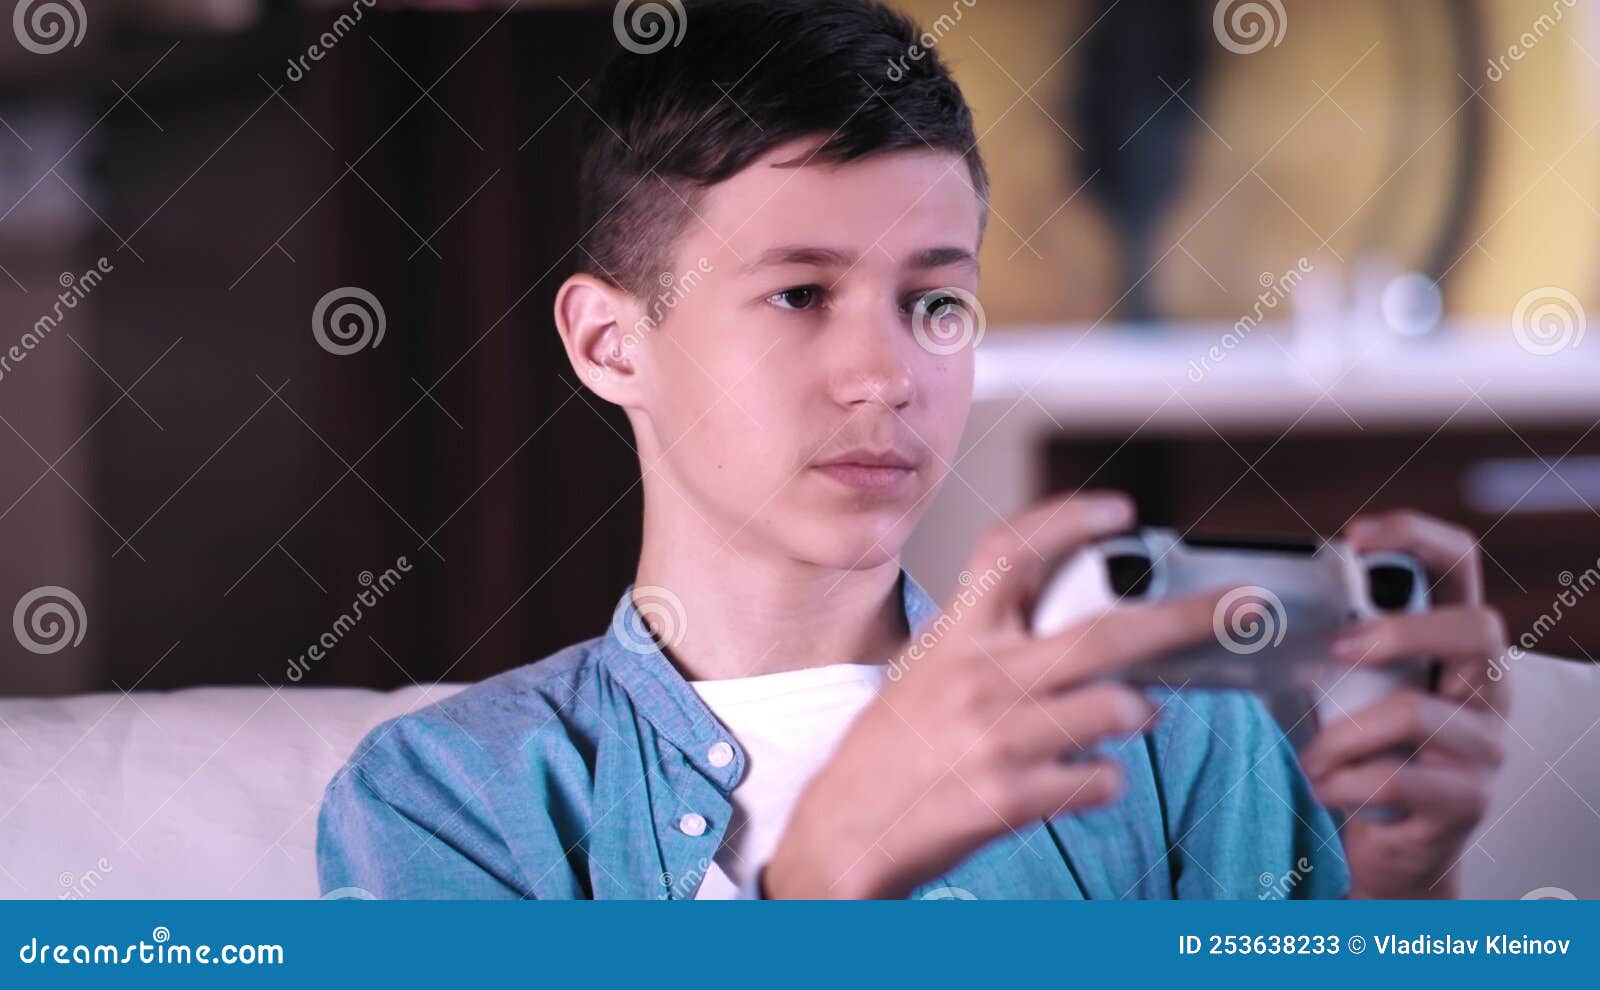 Serious Teen Boy Sitting on the Sofa and Plays a Game on a Console ...